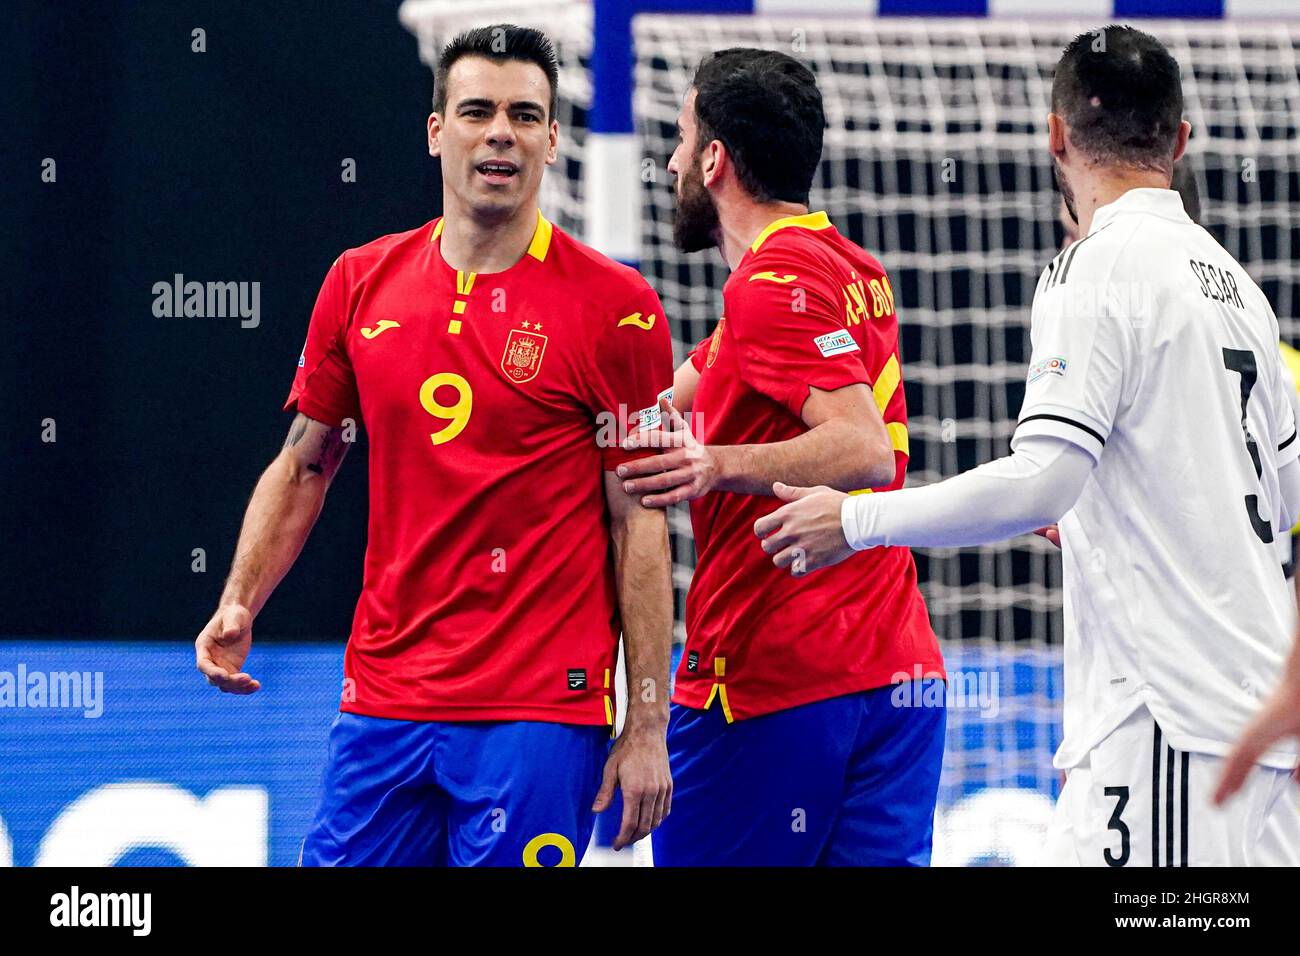 GRONINGEN, NETHERLANDS - JANUARY 22: Sergio Lozano of Spain during the Men's Futsal Euro 2022 Group D match between Spain and the Bosnia and Herzegovina at the Martiniplaza on January 22, 2022 in Groningen, Netherlands (Photo by Andre Weening/Orange Pictures) Stock Photo